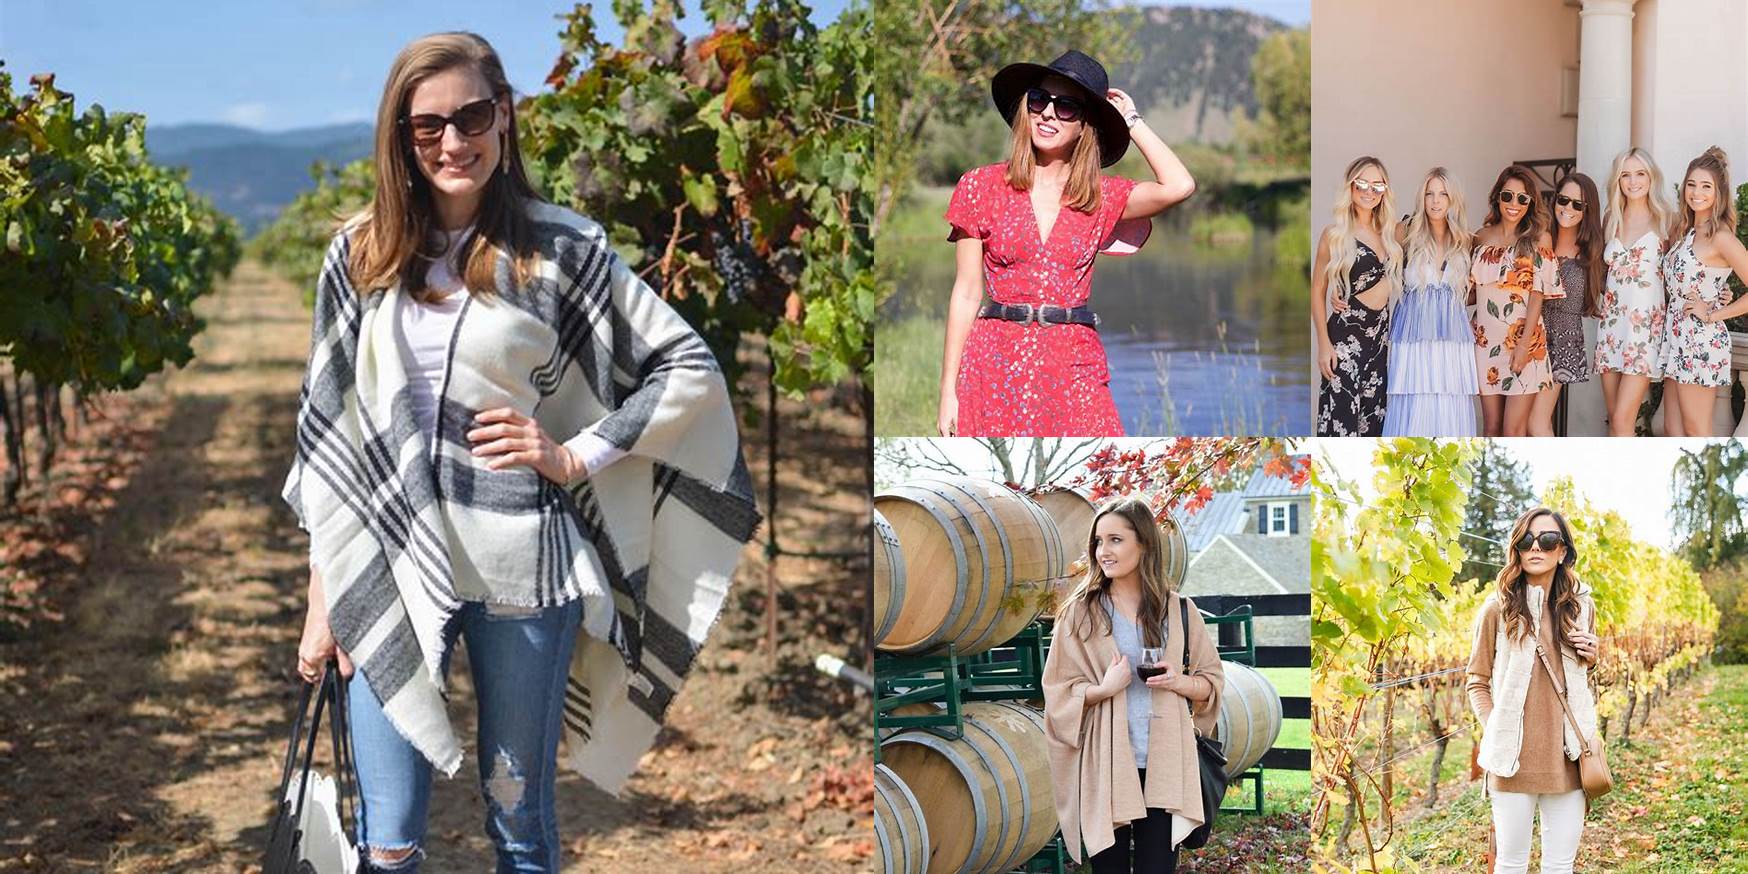 How To Dress To A Winery